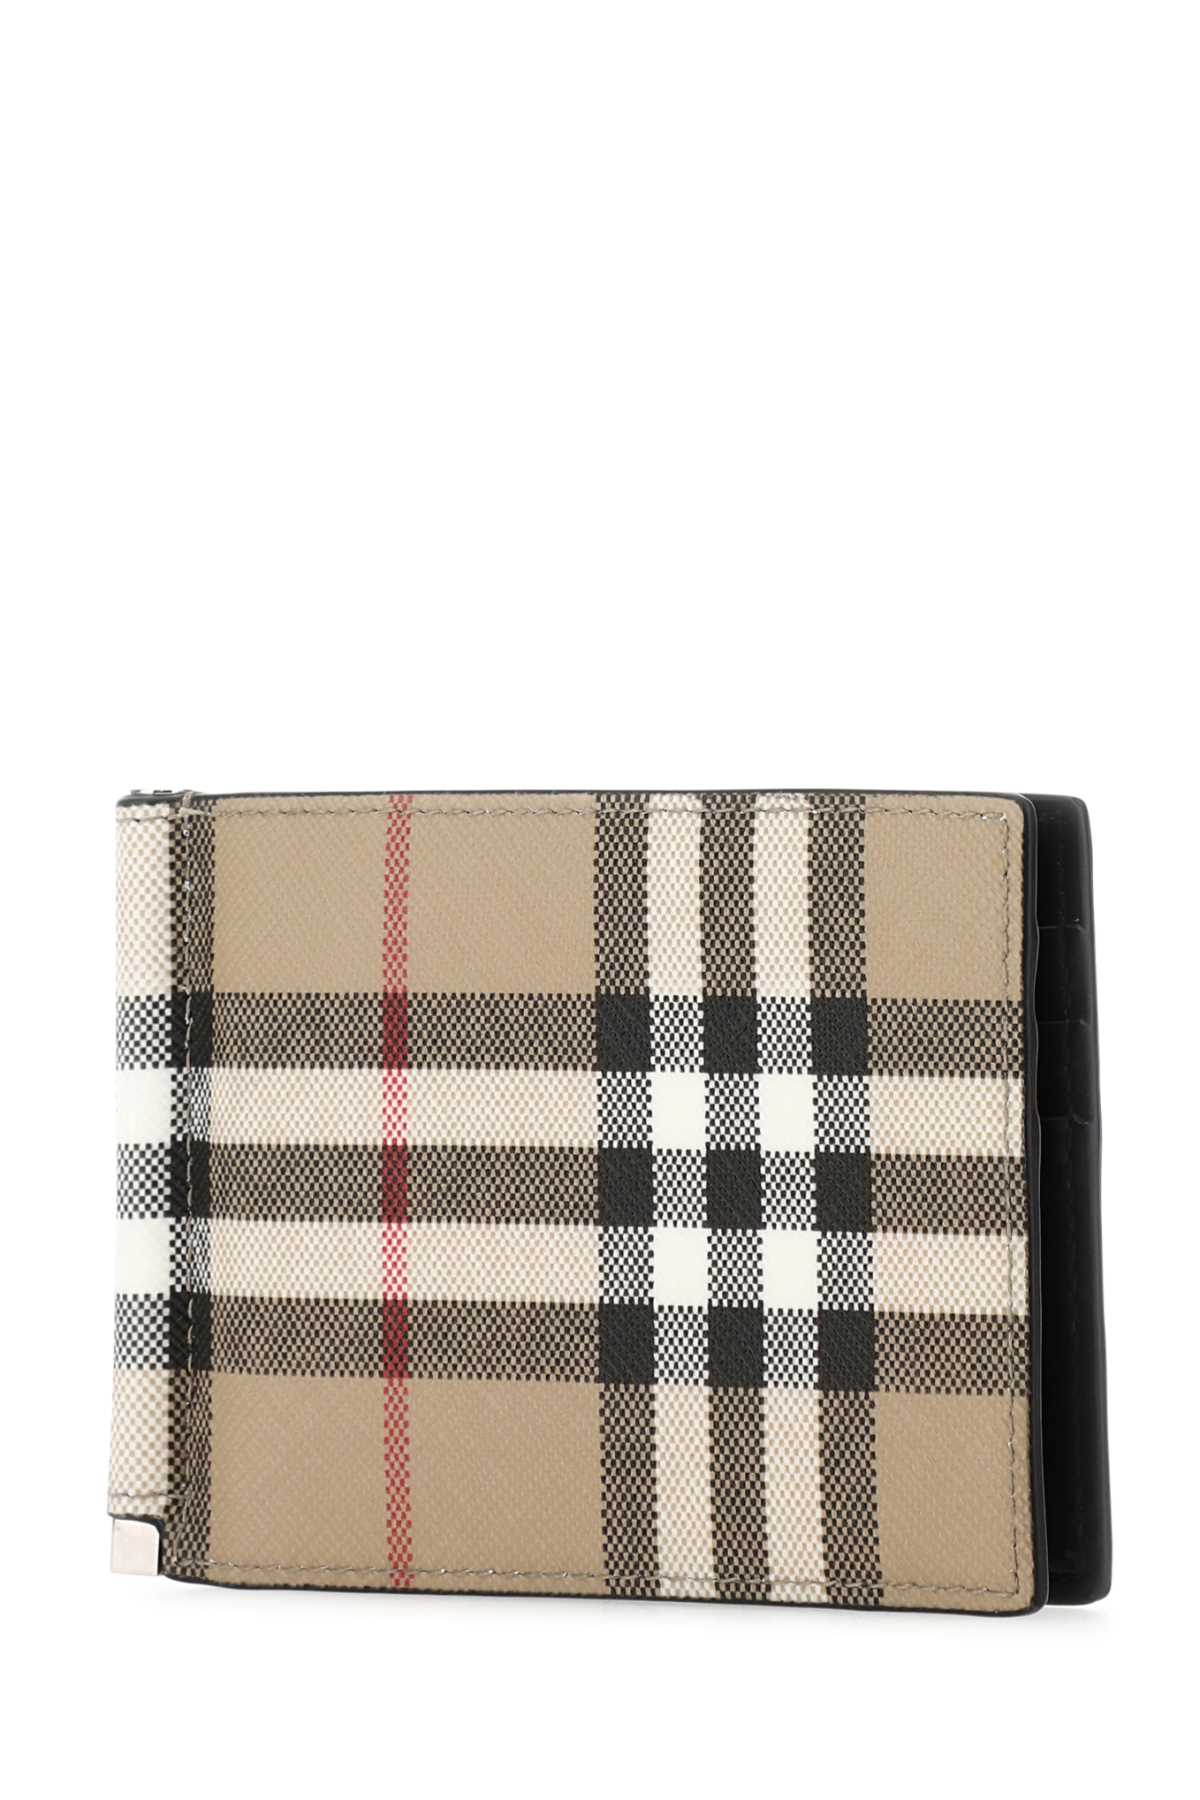 Shop Burberry Printed E-canvas Wallet In A7026